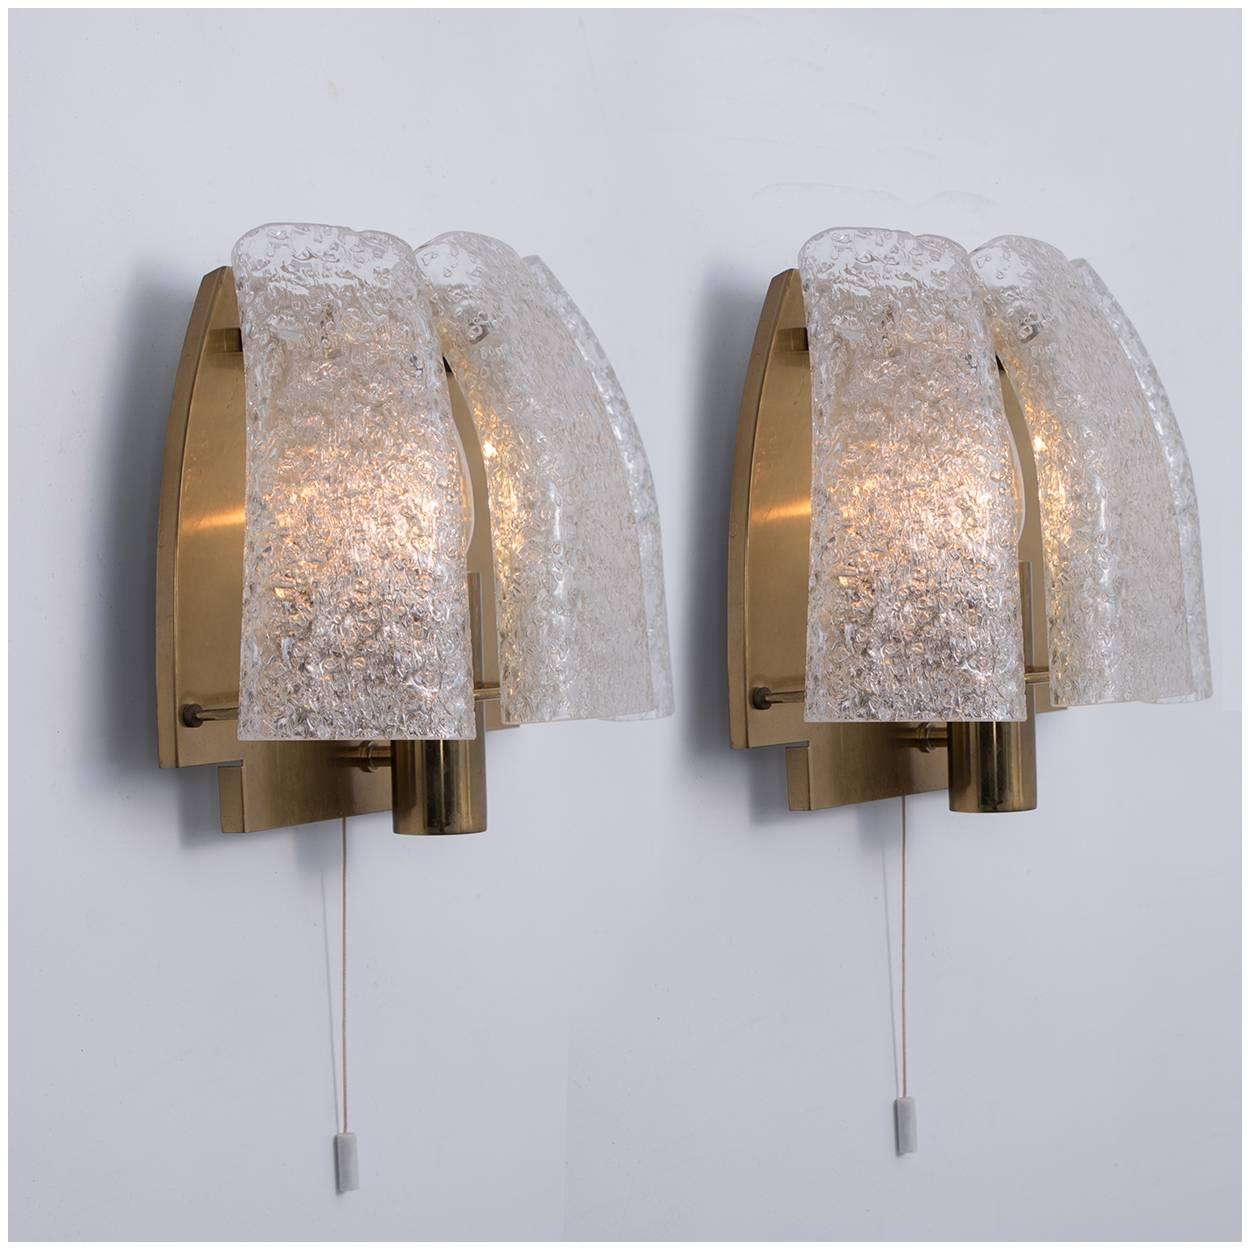 Doria Light Fixtures, One Chandelier and Two Wall Sconces For Sale 1